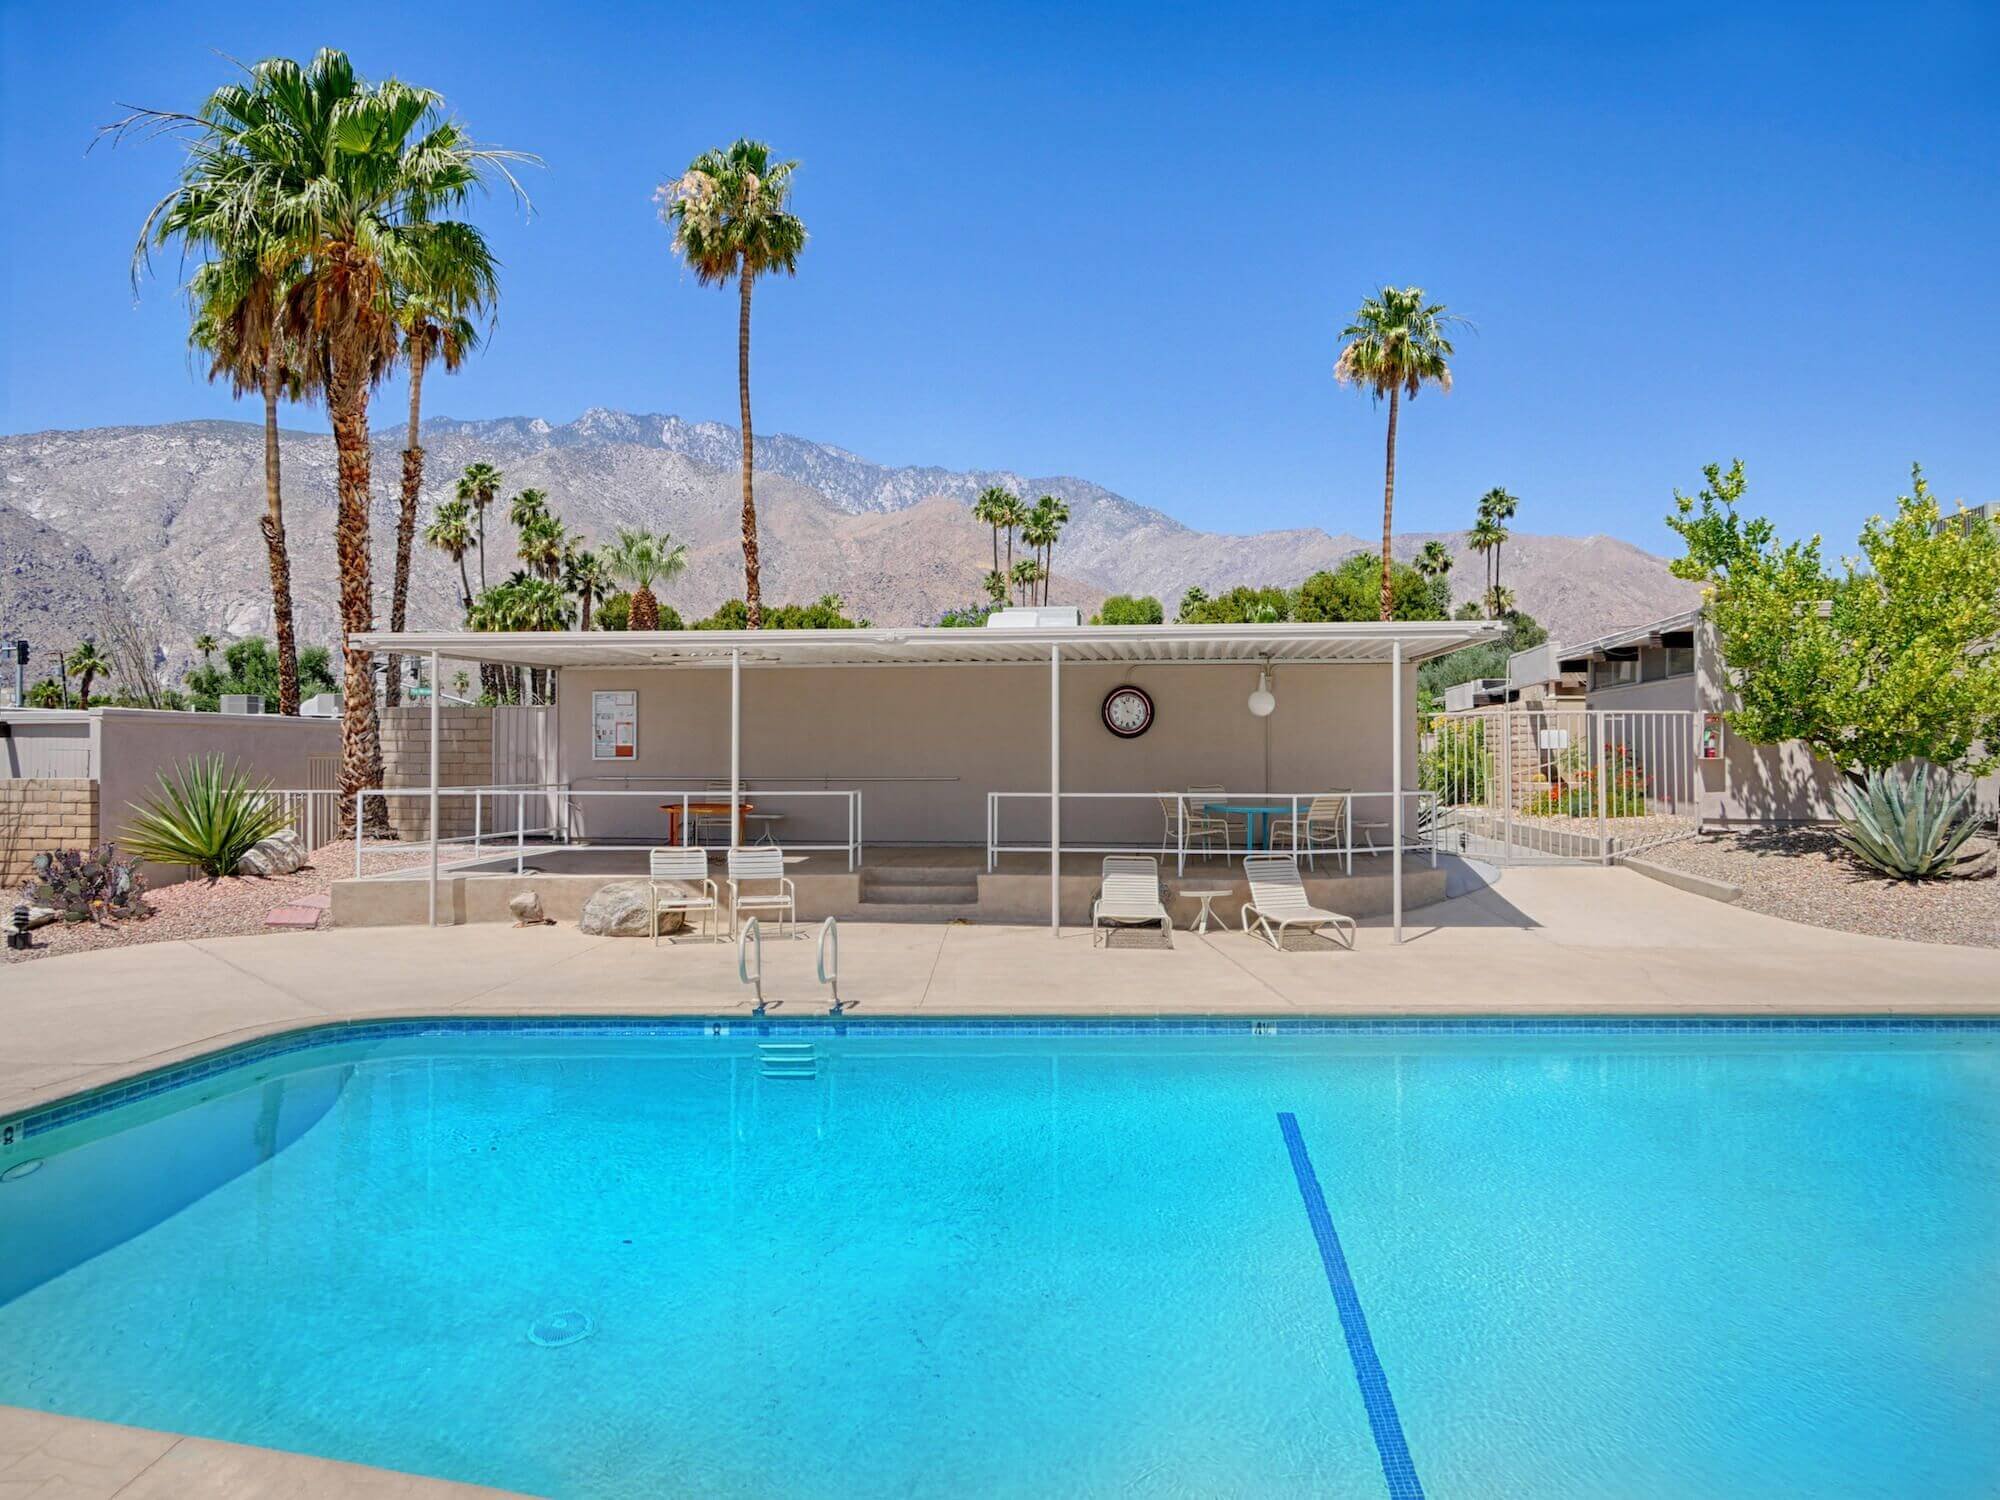 Park Imperial North Palm Springs 92262